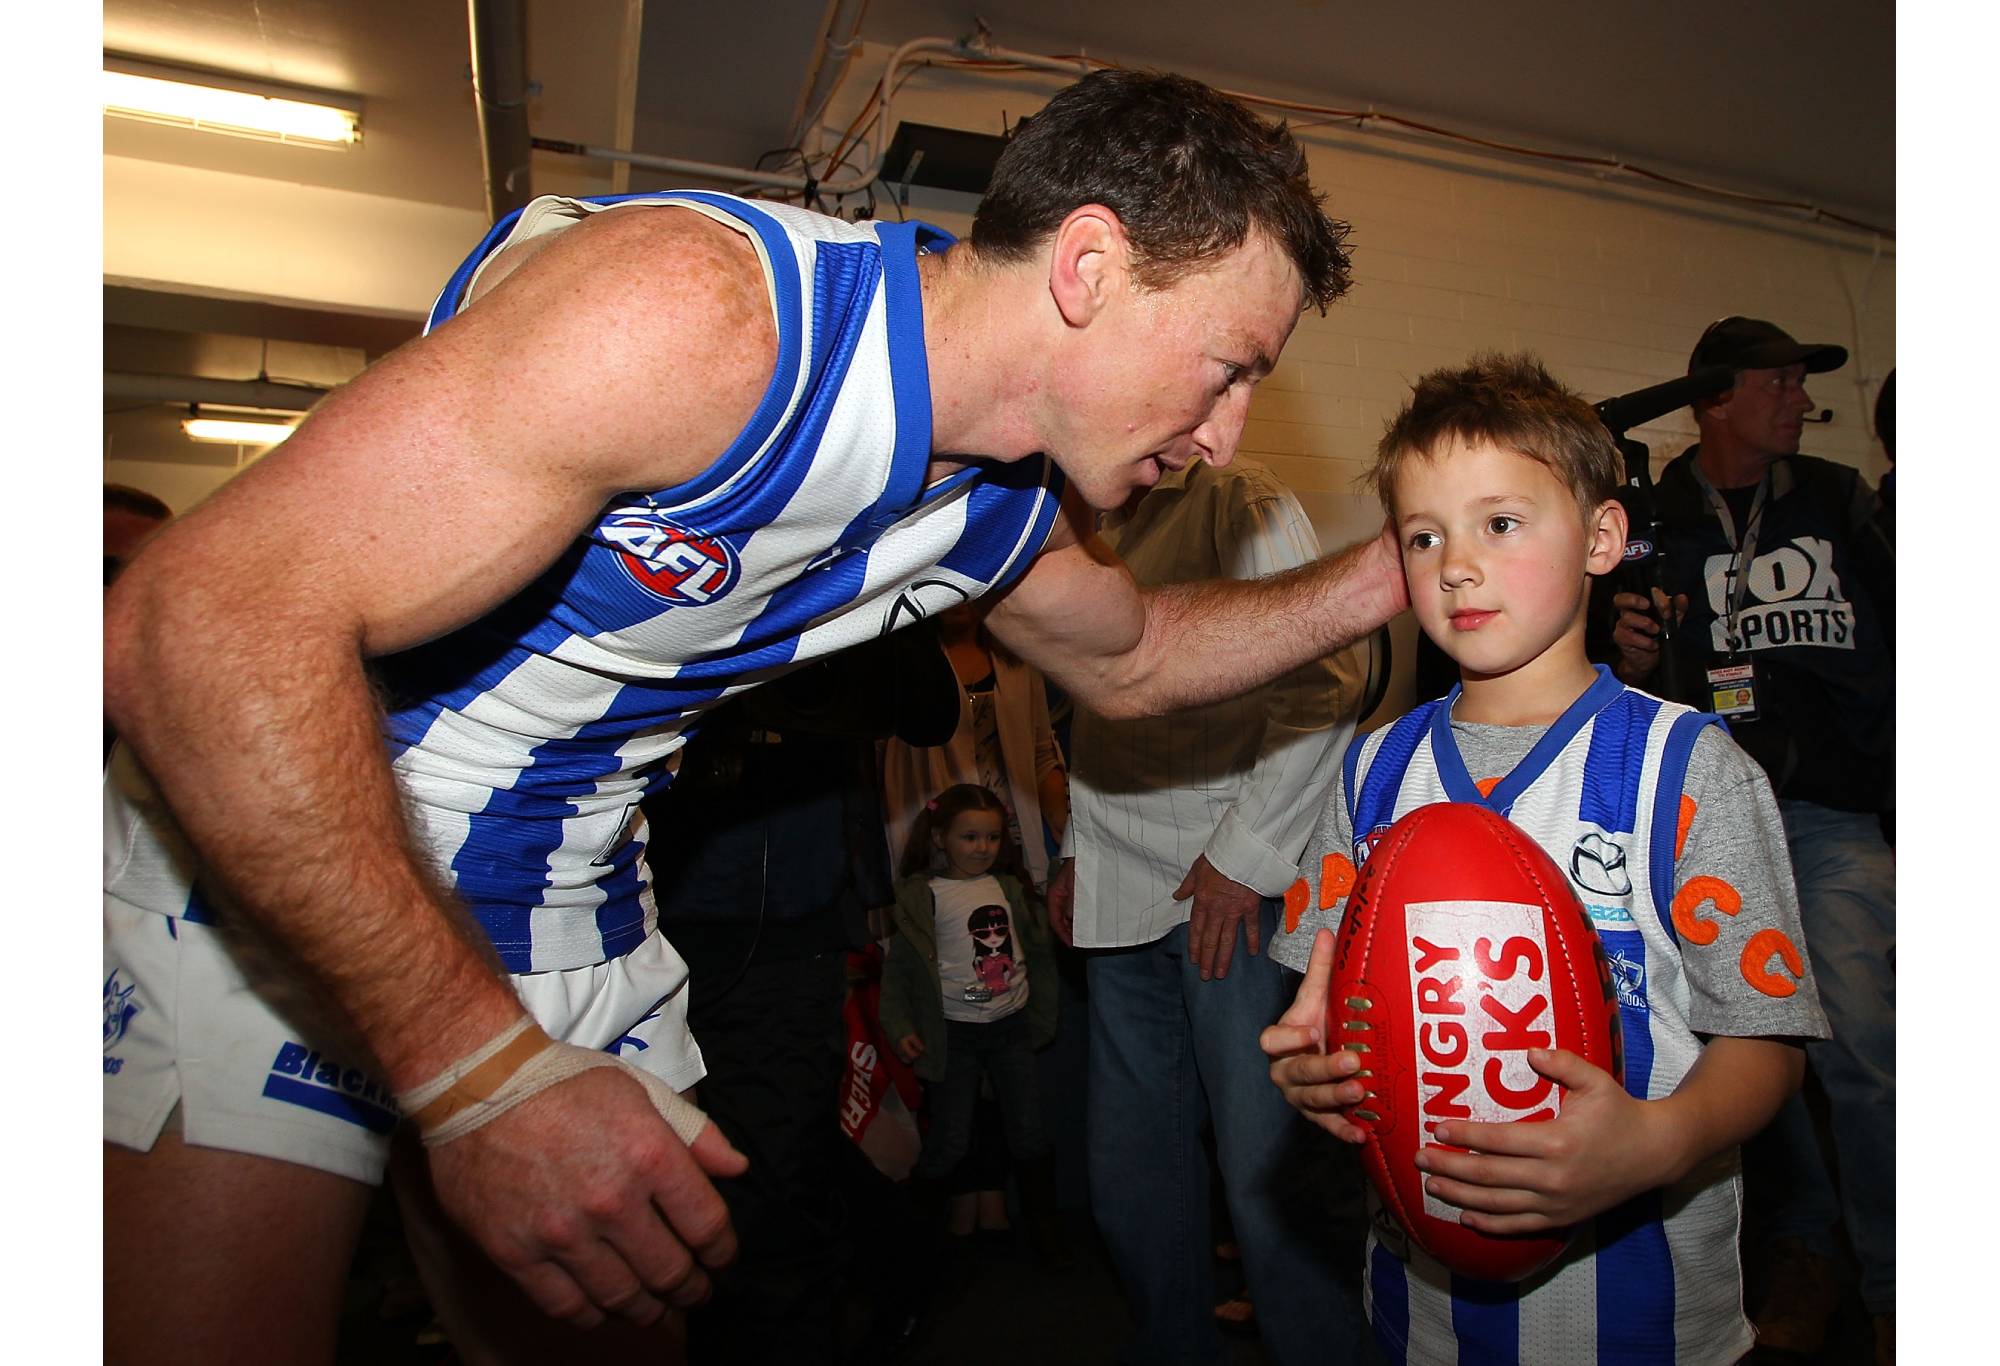 PERTH, AUSTRALIA - AUGUST 22: Brent Harvey of the Kangaroos hands the game ball to his son Cooper after playing his 300th game during the round 21 AFL match between the West Coast Eagles and the North Melbourne Kangaroos at Subiaco Oval on August 22, 2010 in Perth, Australia. (Photo by Paul Kane/Getty Images)